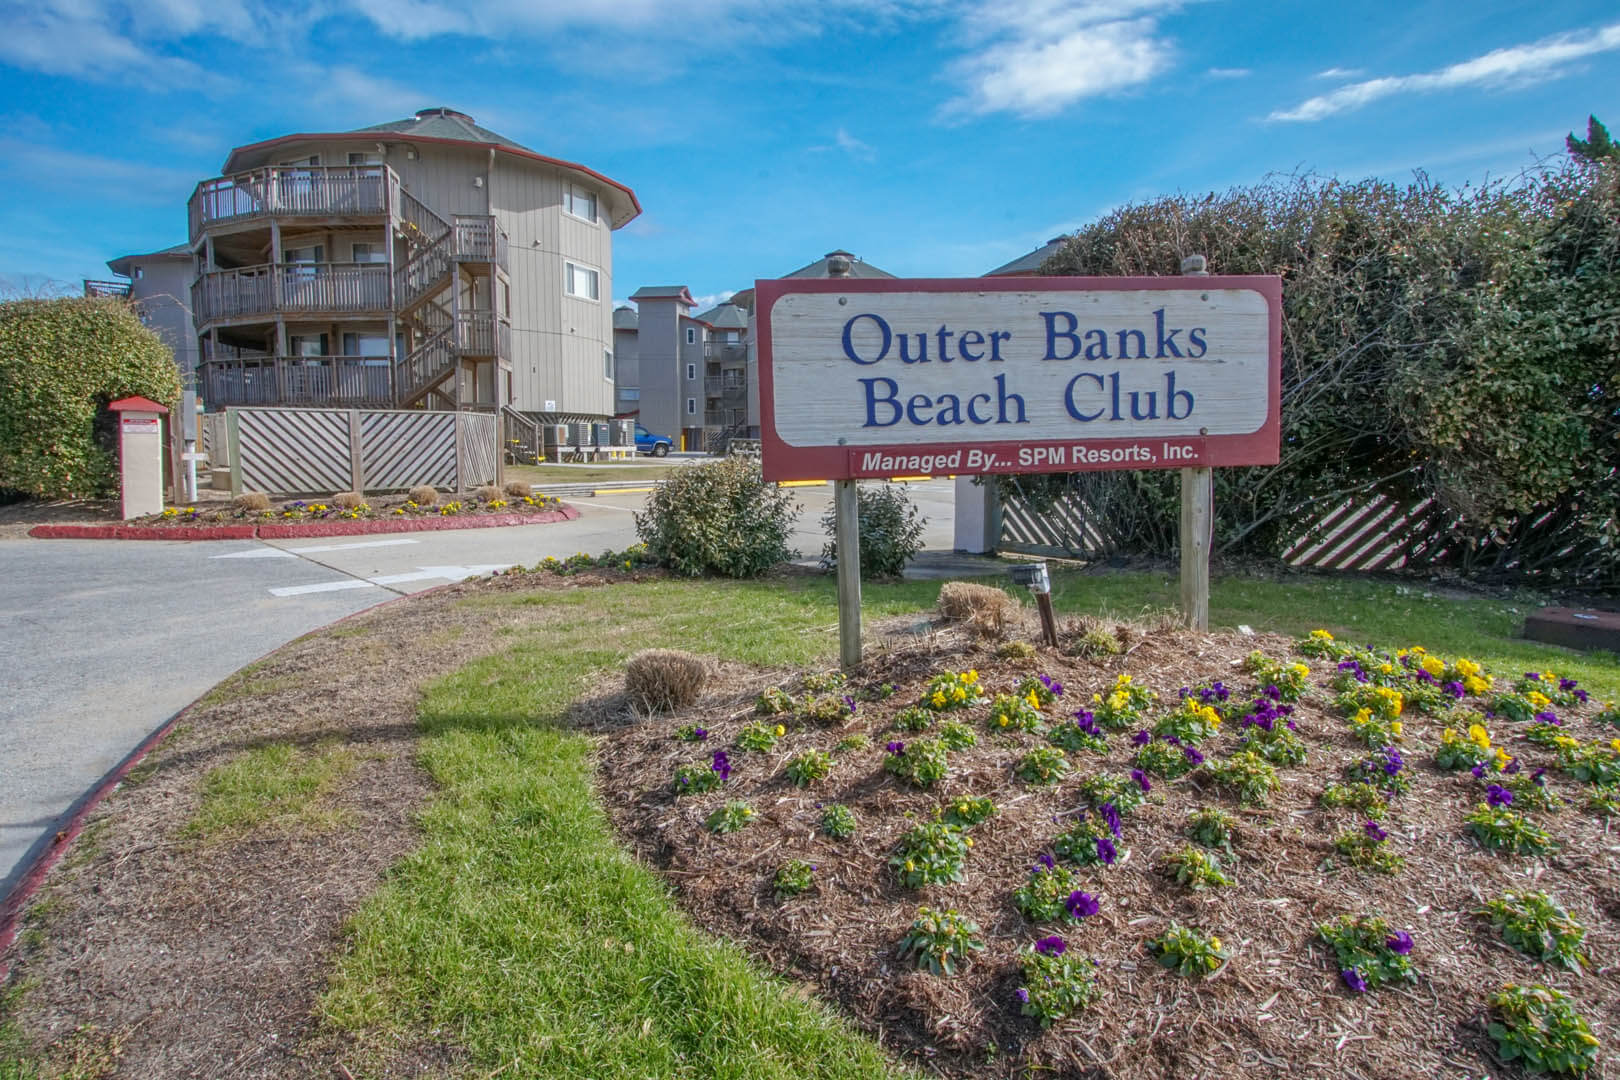 A welcoming resort entrance and signage at VRI's Outer Banks Beach Club in North Carolina.